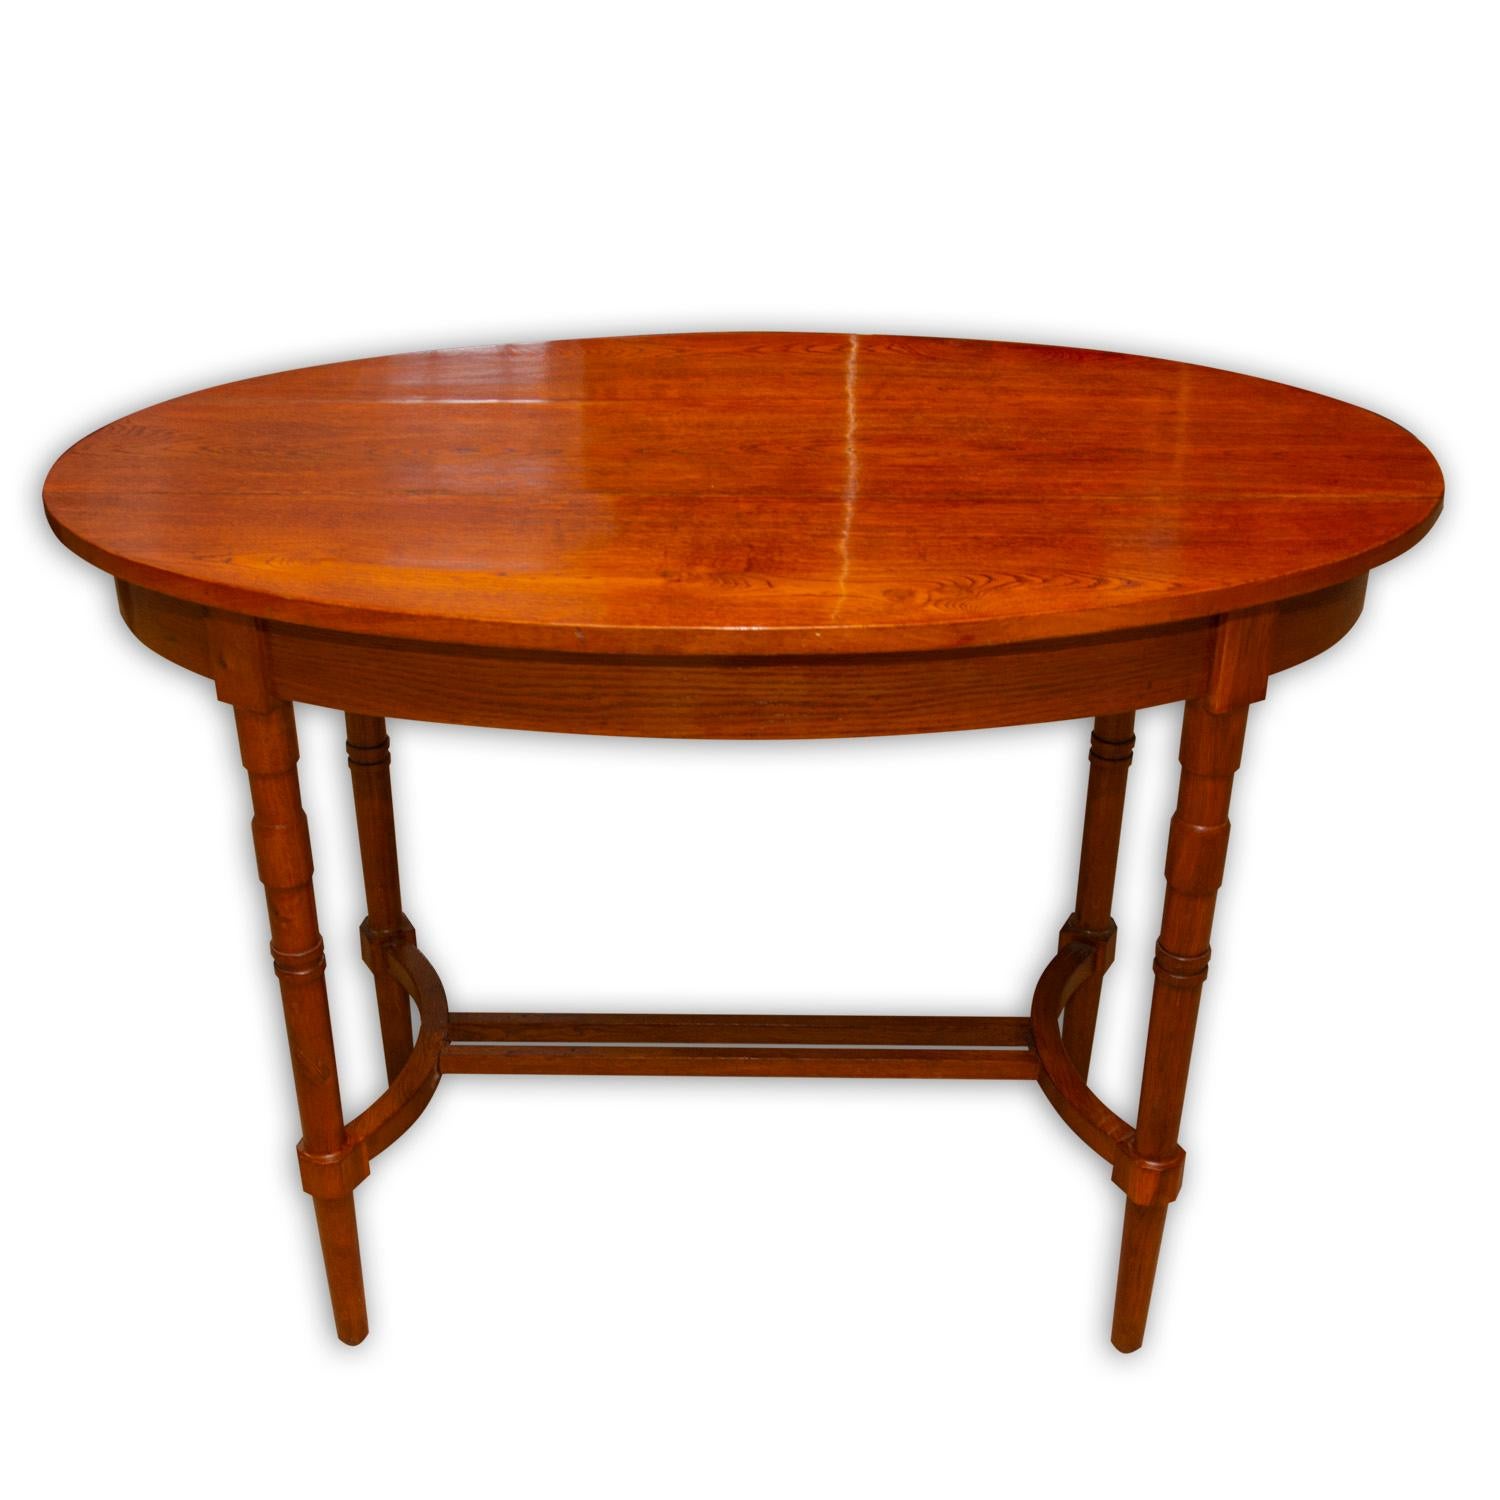 This oval occasional table was designed and produced in Austria-Hungary, circa 1915. It was made of oakwood. The table is completely refurbished and varnished.

Measures: Height: 80 cm

Lenght: 111 cm

Depth: 62 cm.